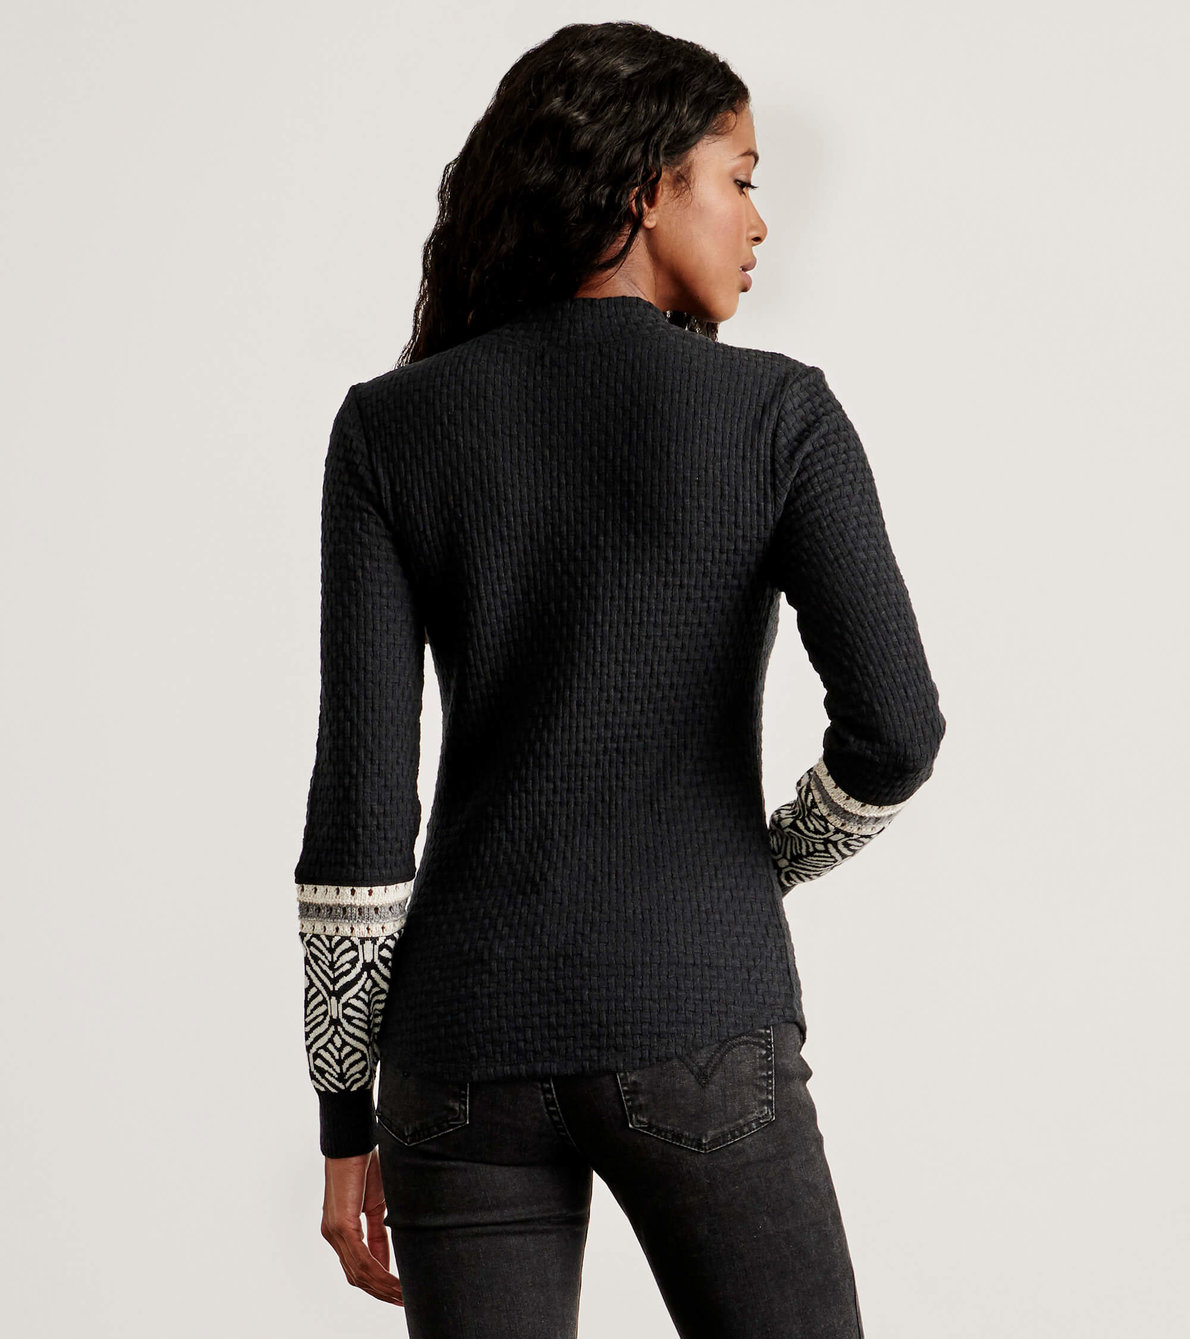 View larger image of Aspen Sweater - Black